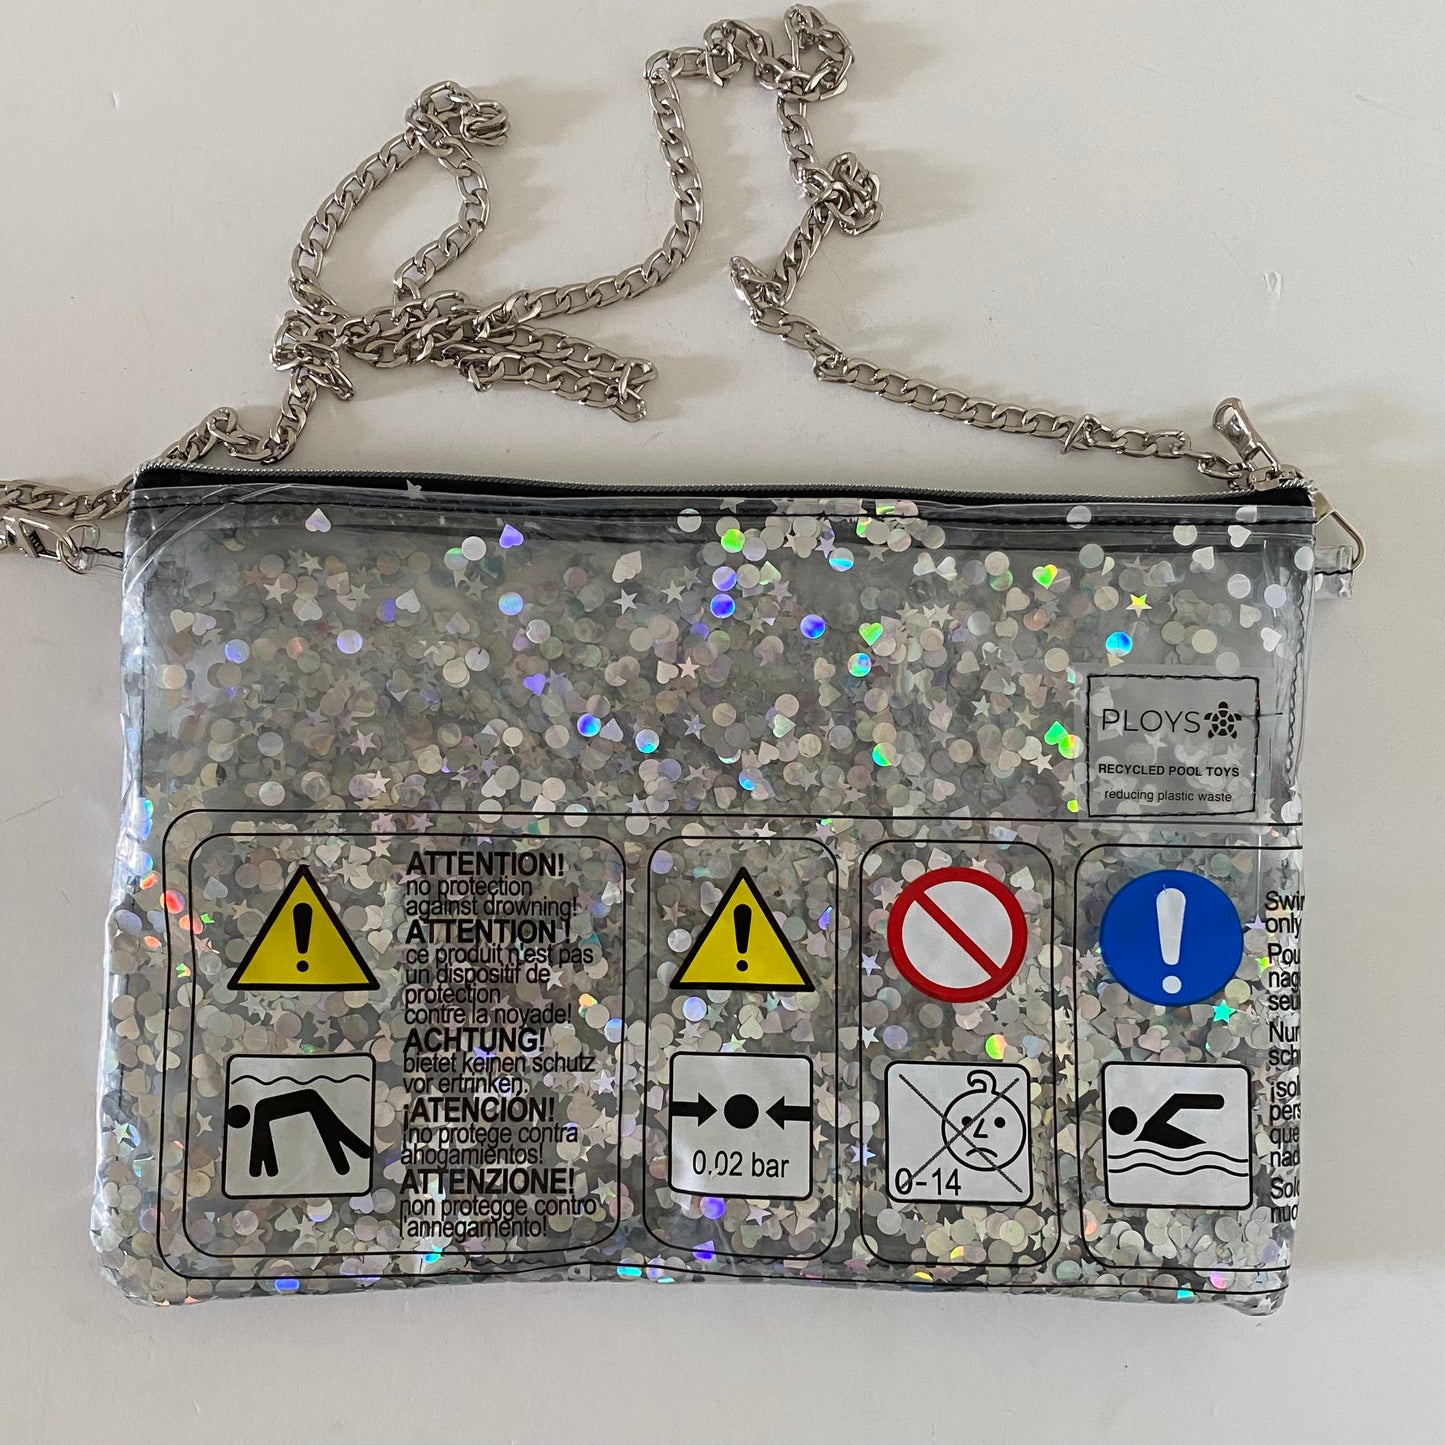 Glitter Purses, Evening Purse, Clutch bag - recycled inflatables